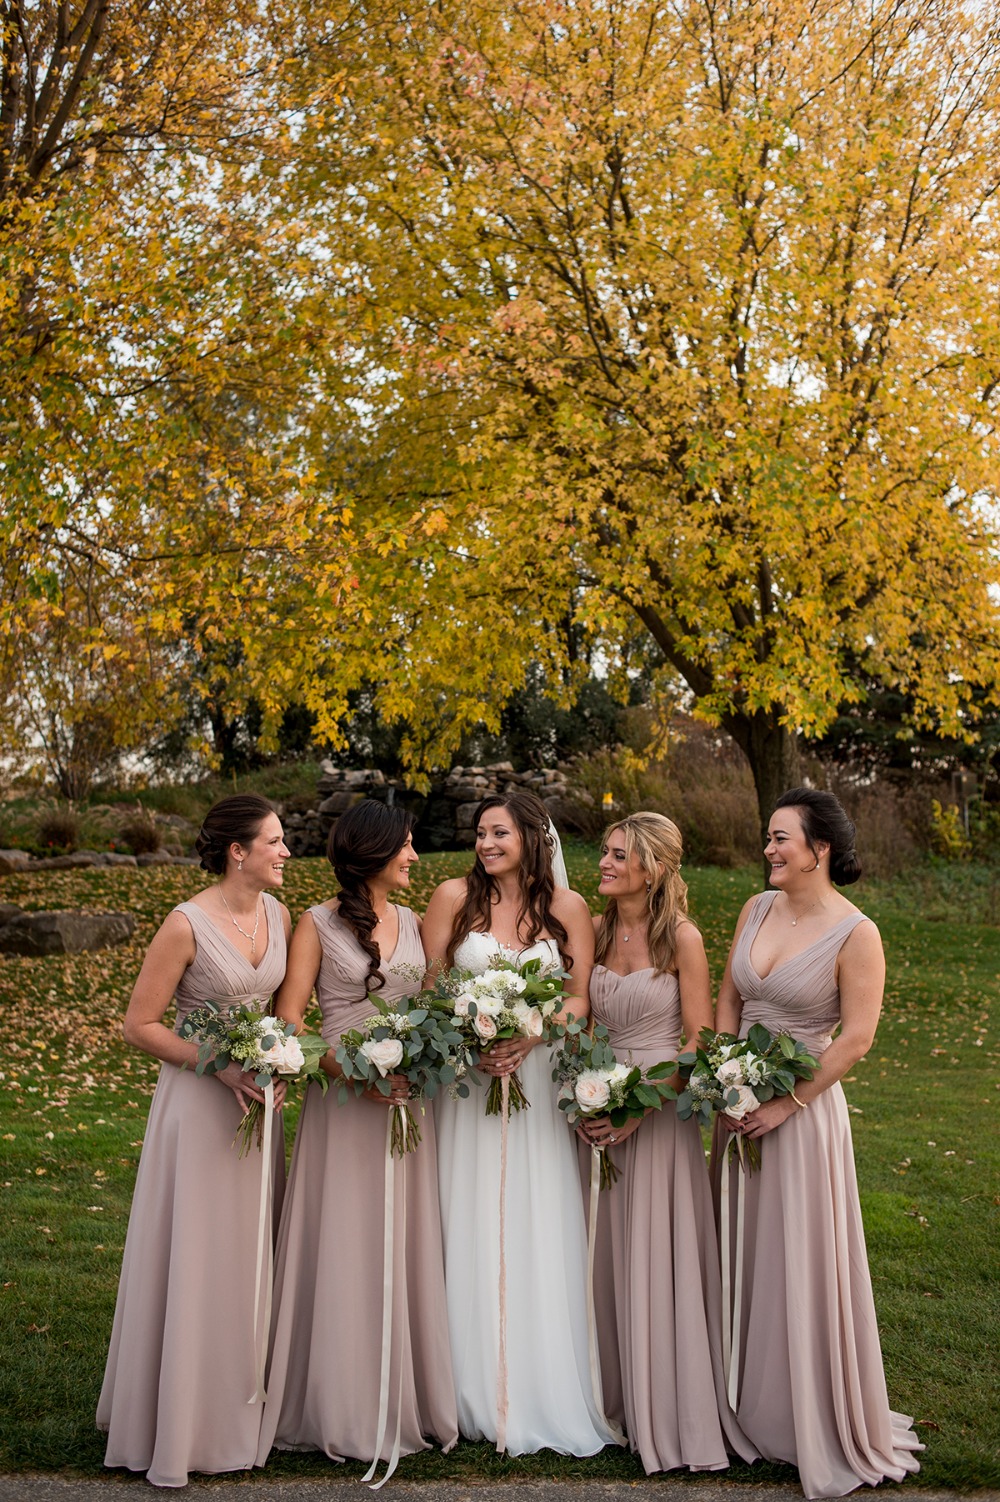 You'll Fall For This All Too Perfect Autumn Wedding Day